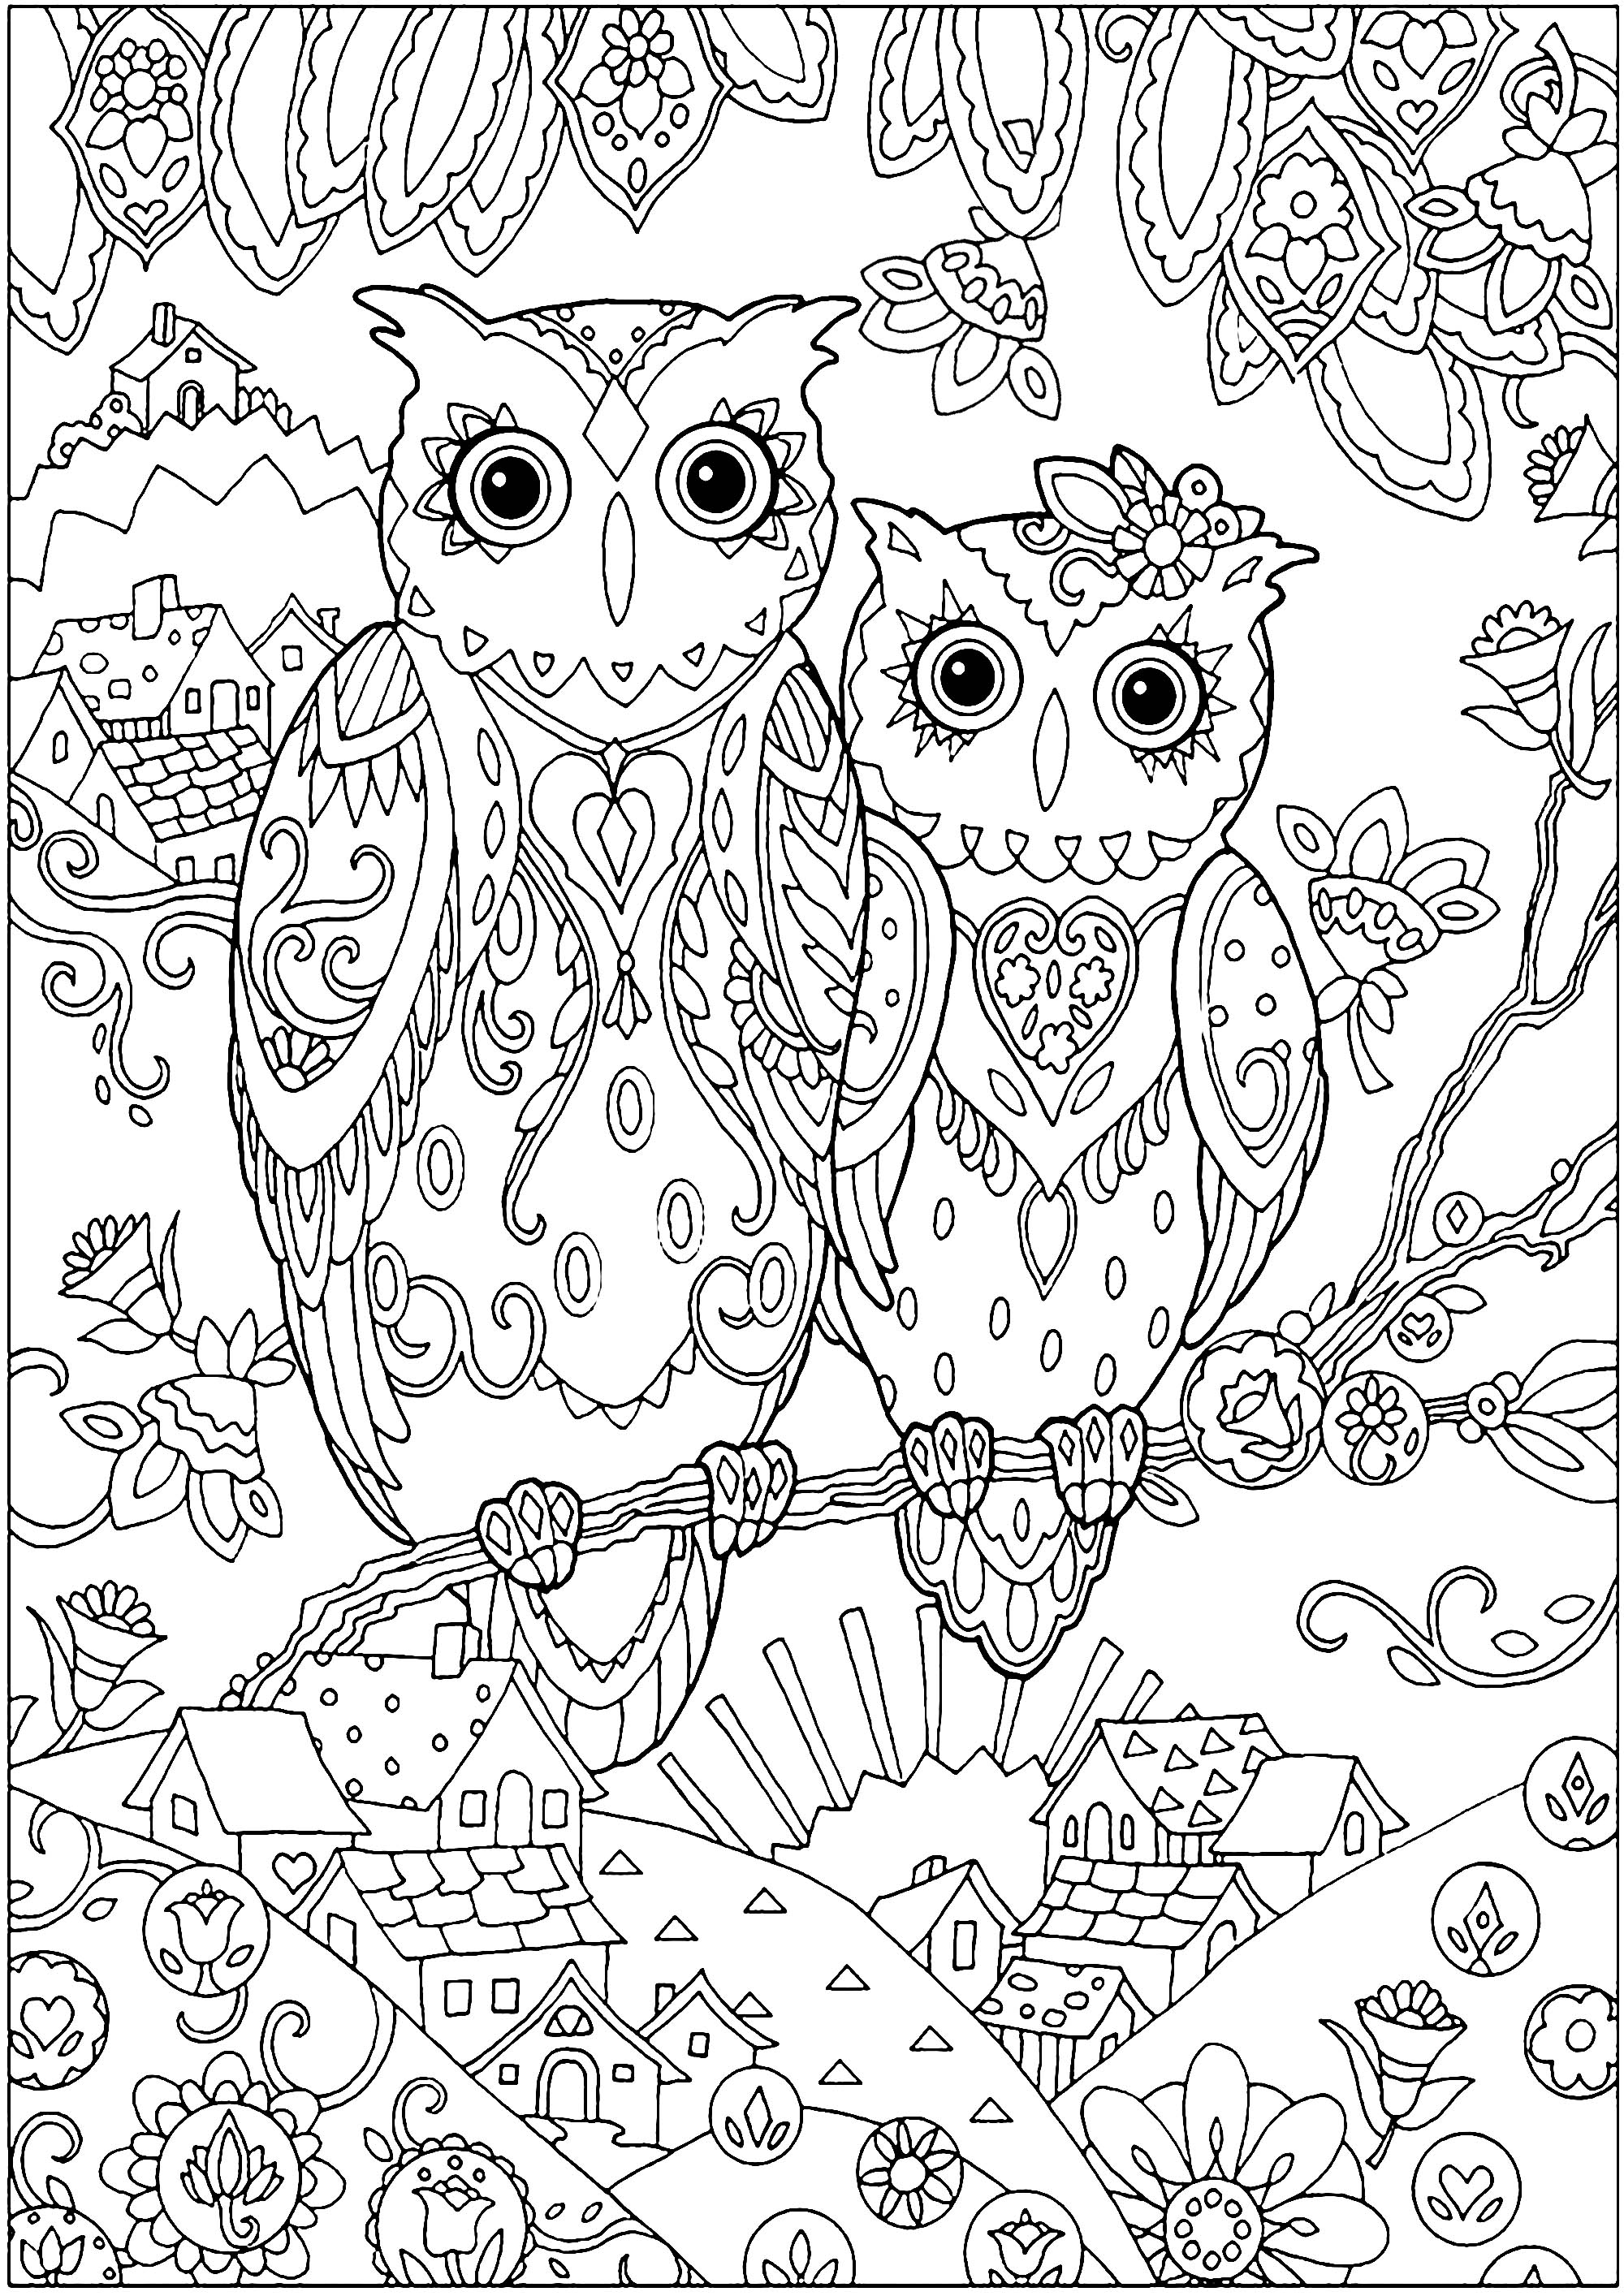 Download Two owls - Owls Adult Coloring Pages